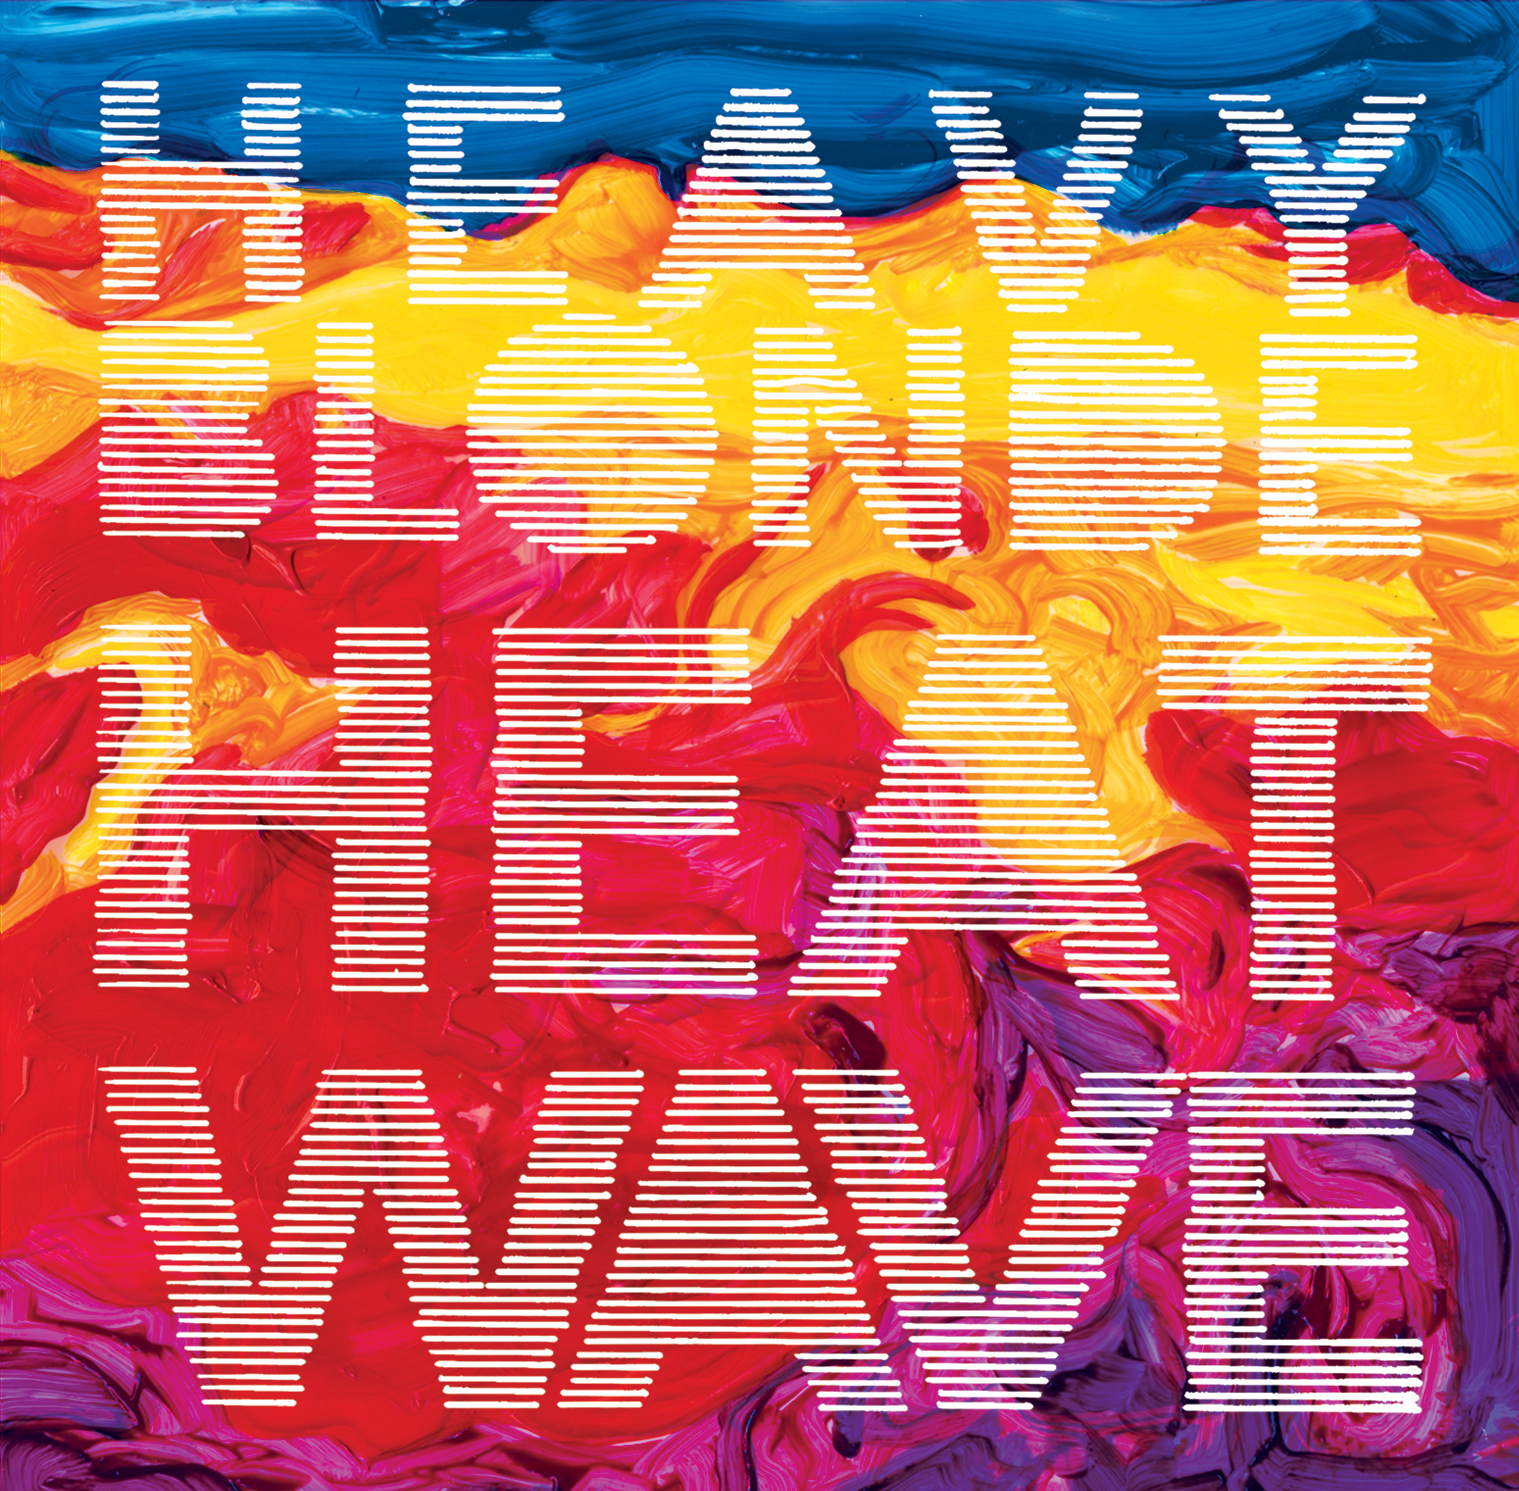 HEAVY BLONDE’S DEBUT TEEMS WITH SMART, ORCHESTRAL POP